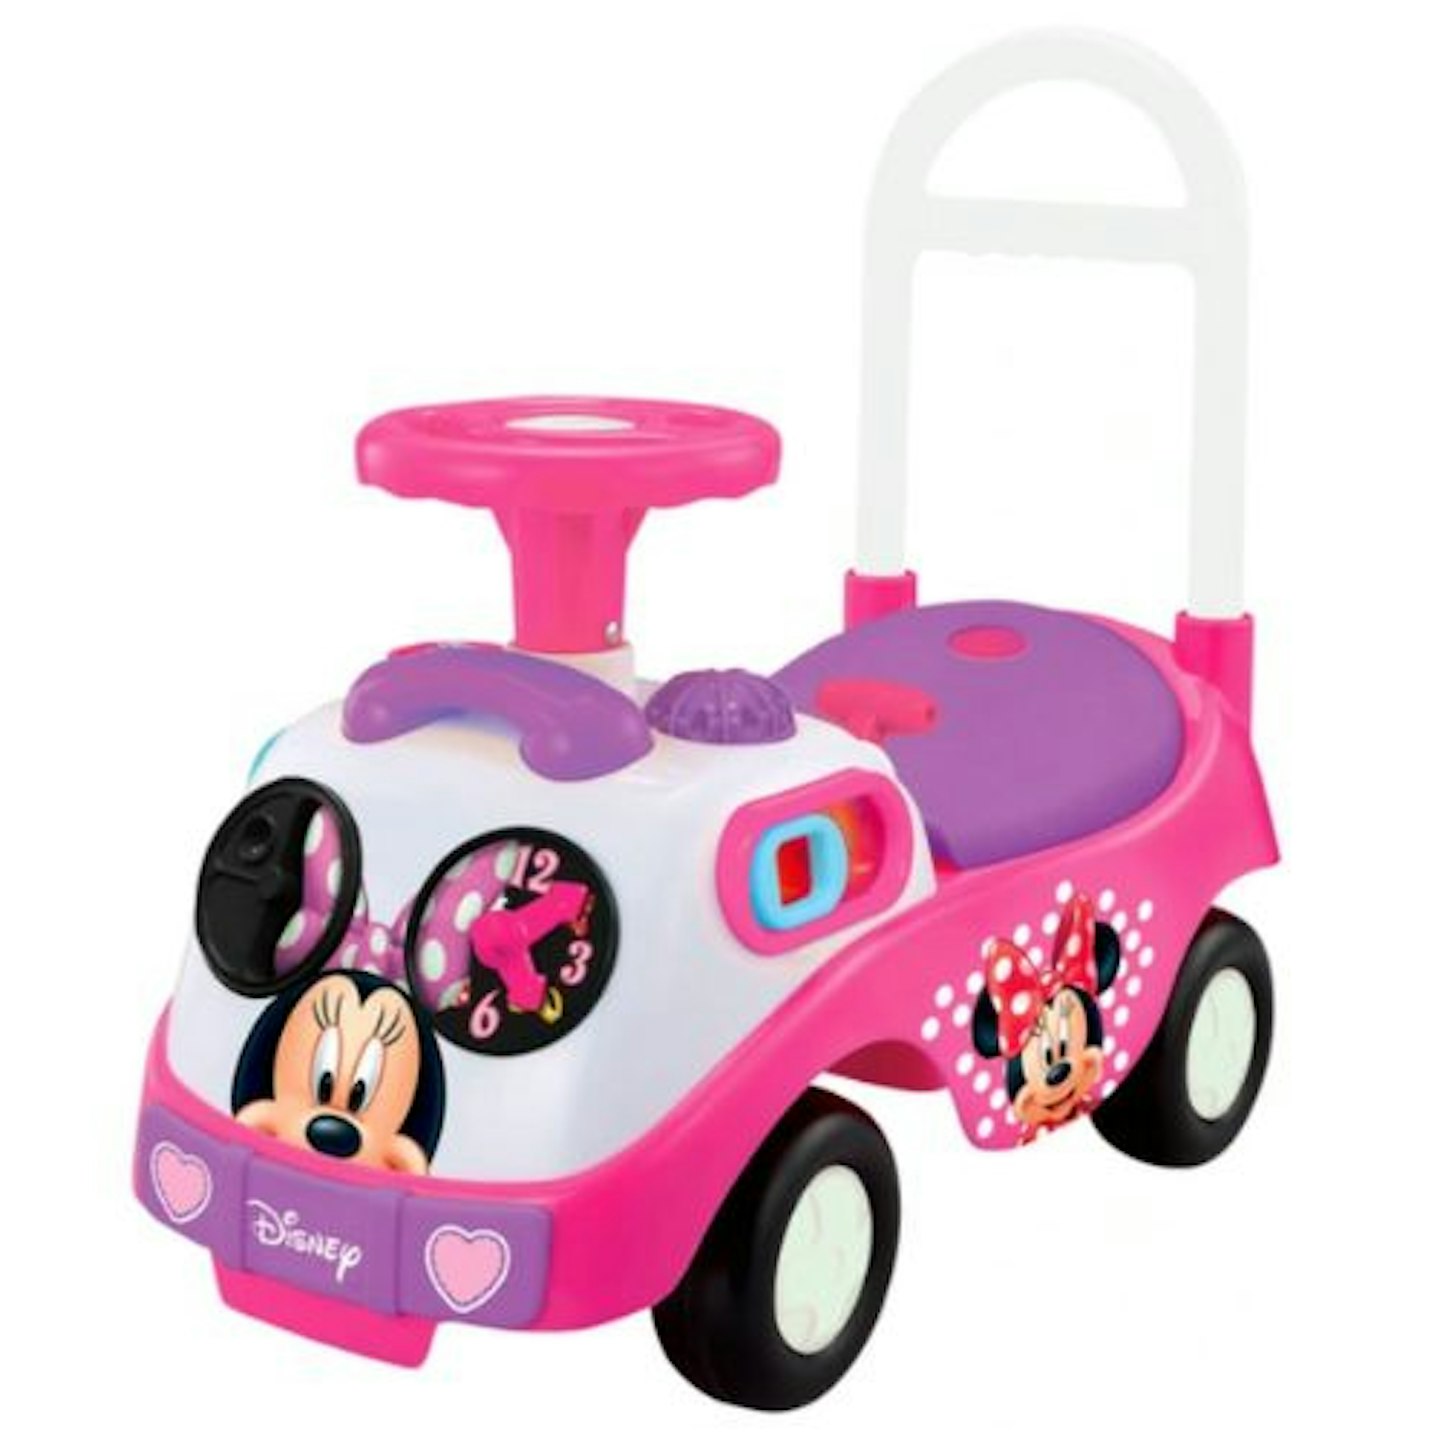 Best Minnie Mouse toy Minnie Mouse My First Activity Ride On